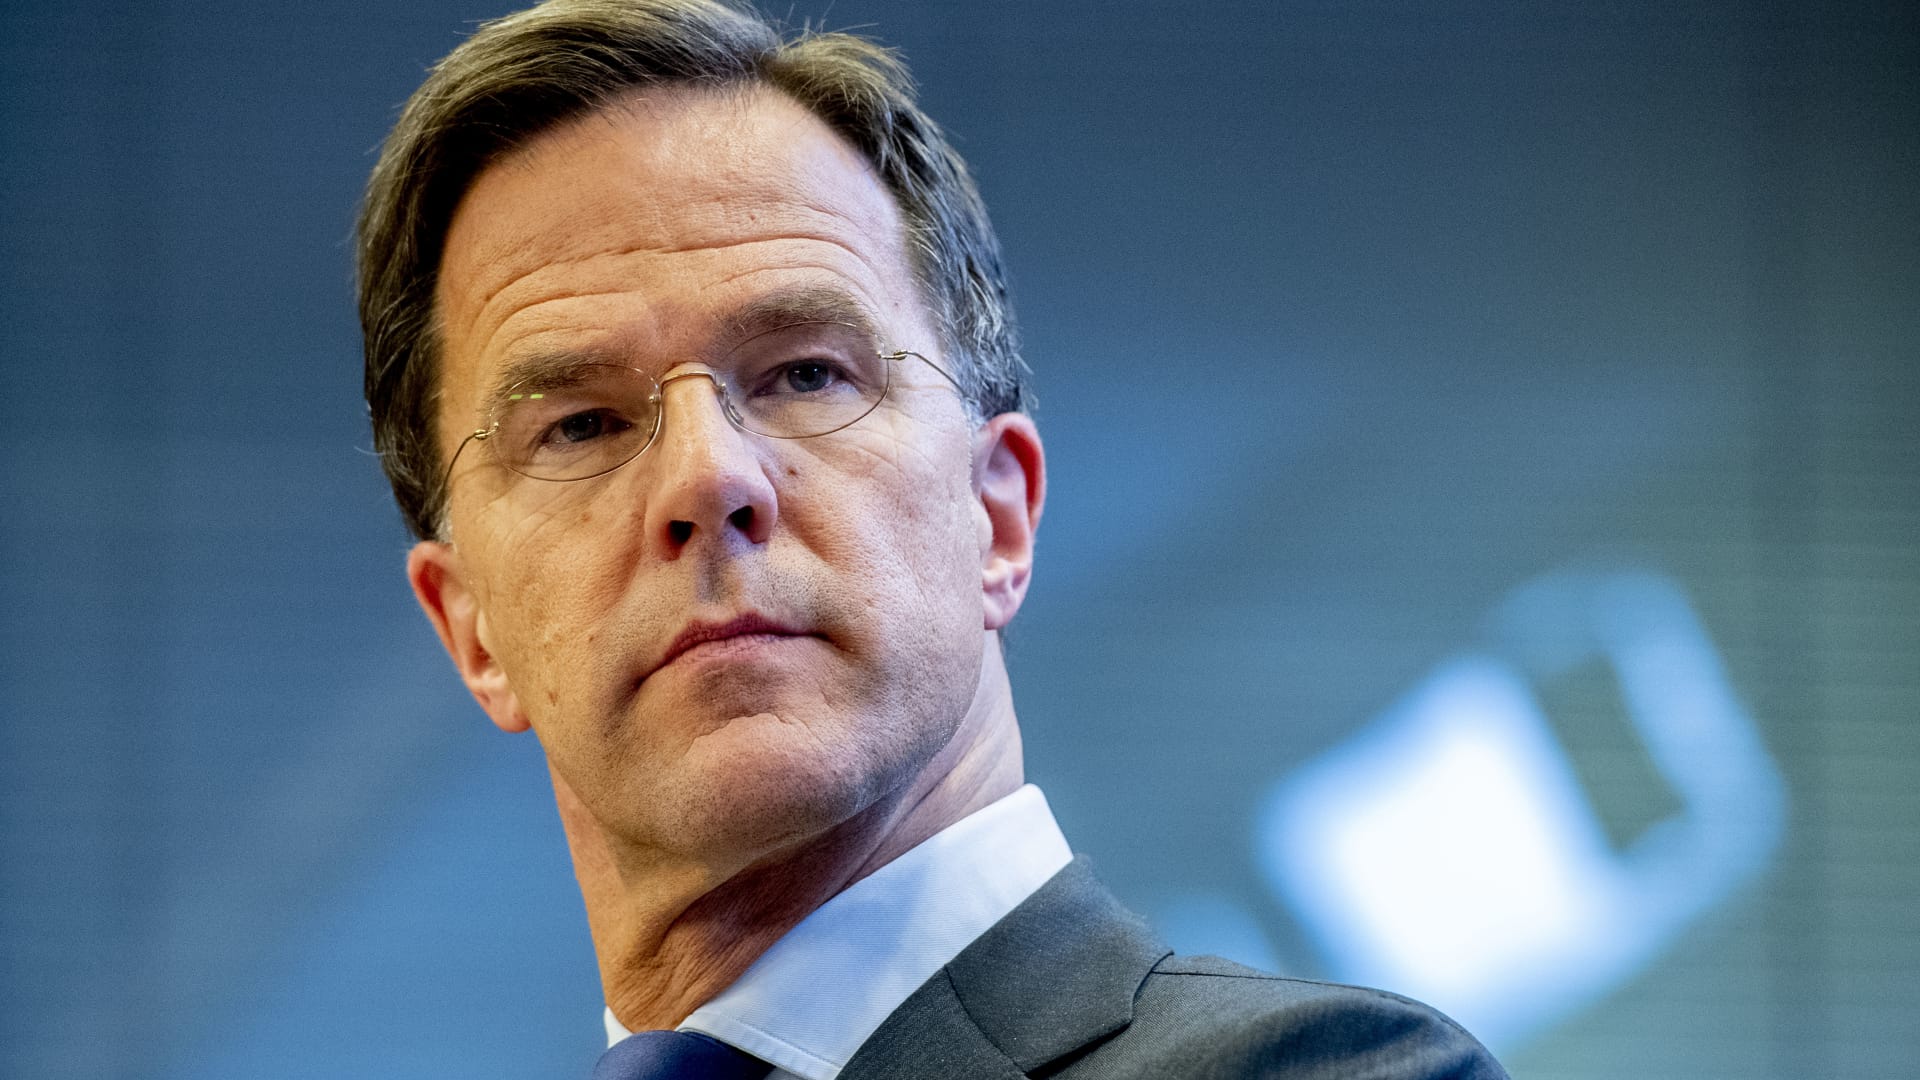 dutch-pm-mark-rutte-says-he-won-t-run-for-fifth-term-after-government